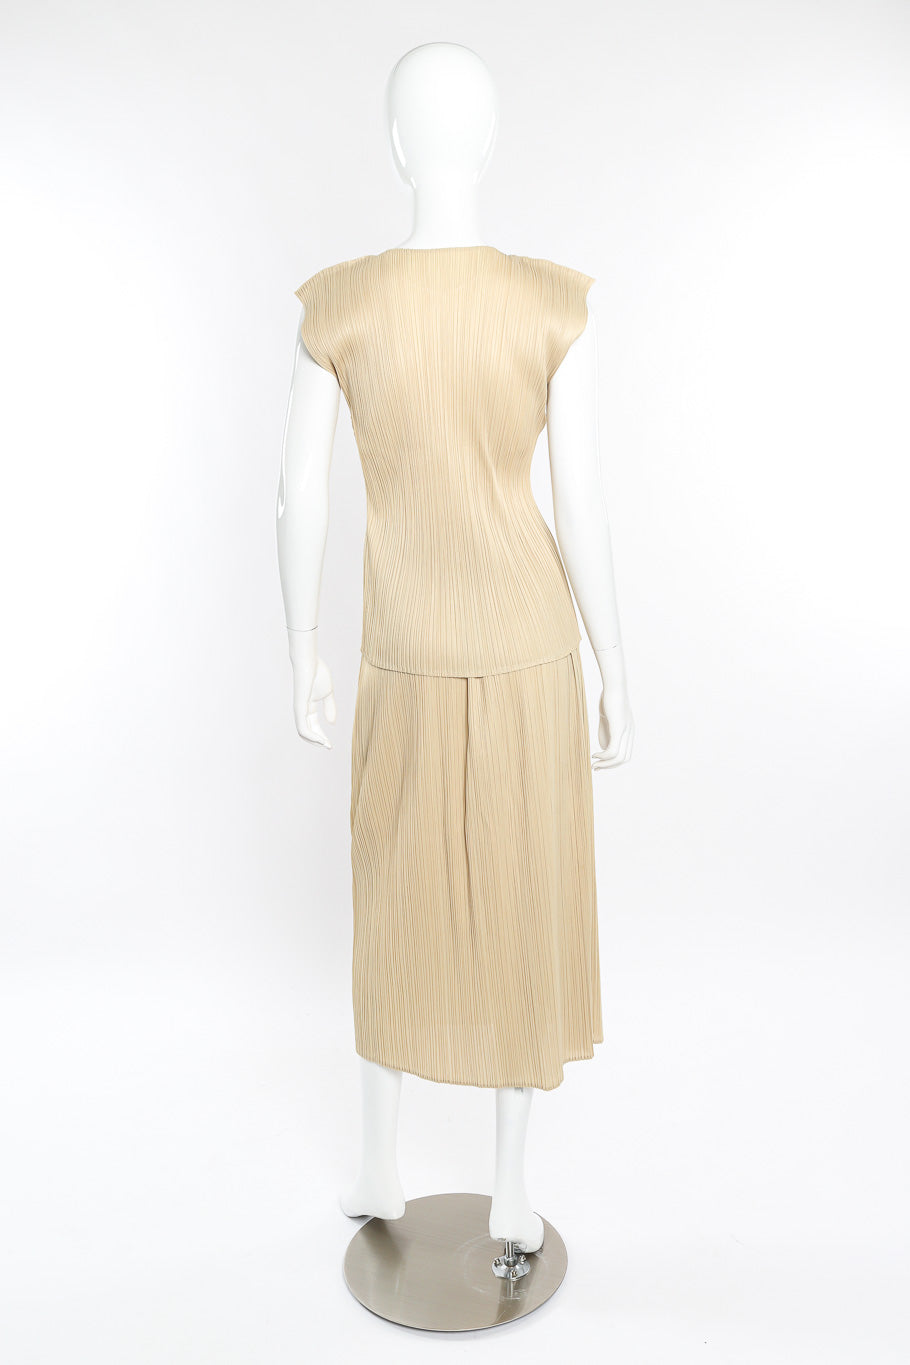 Pleats Please Issey Miyake Pleated Two Piece Set back view on mannequin @Recessla